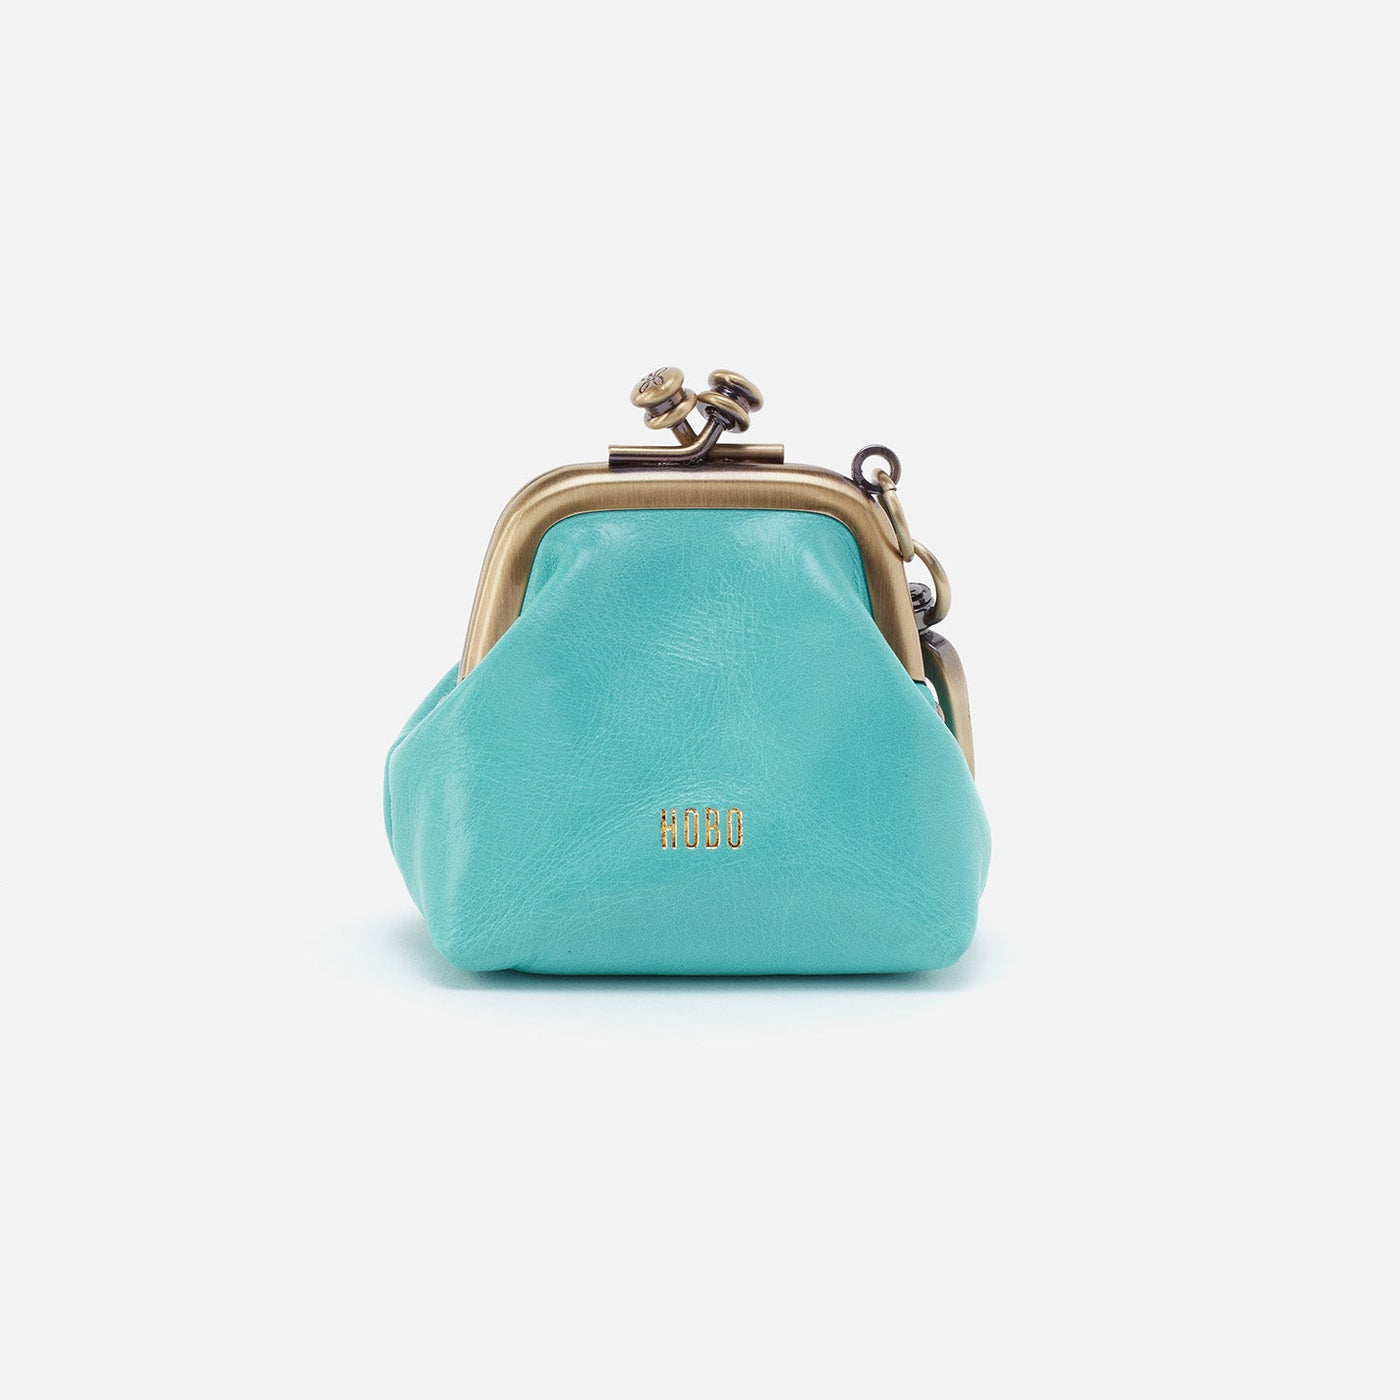 Run Frame Pouch in Polished Leather - Light Aqua